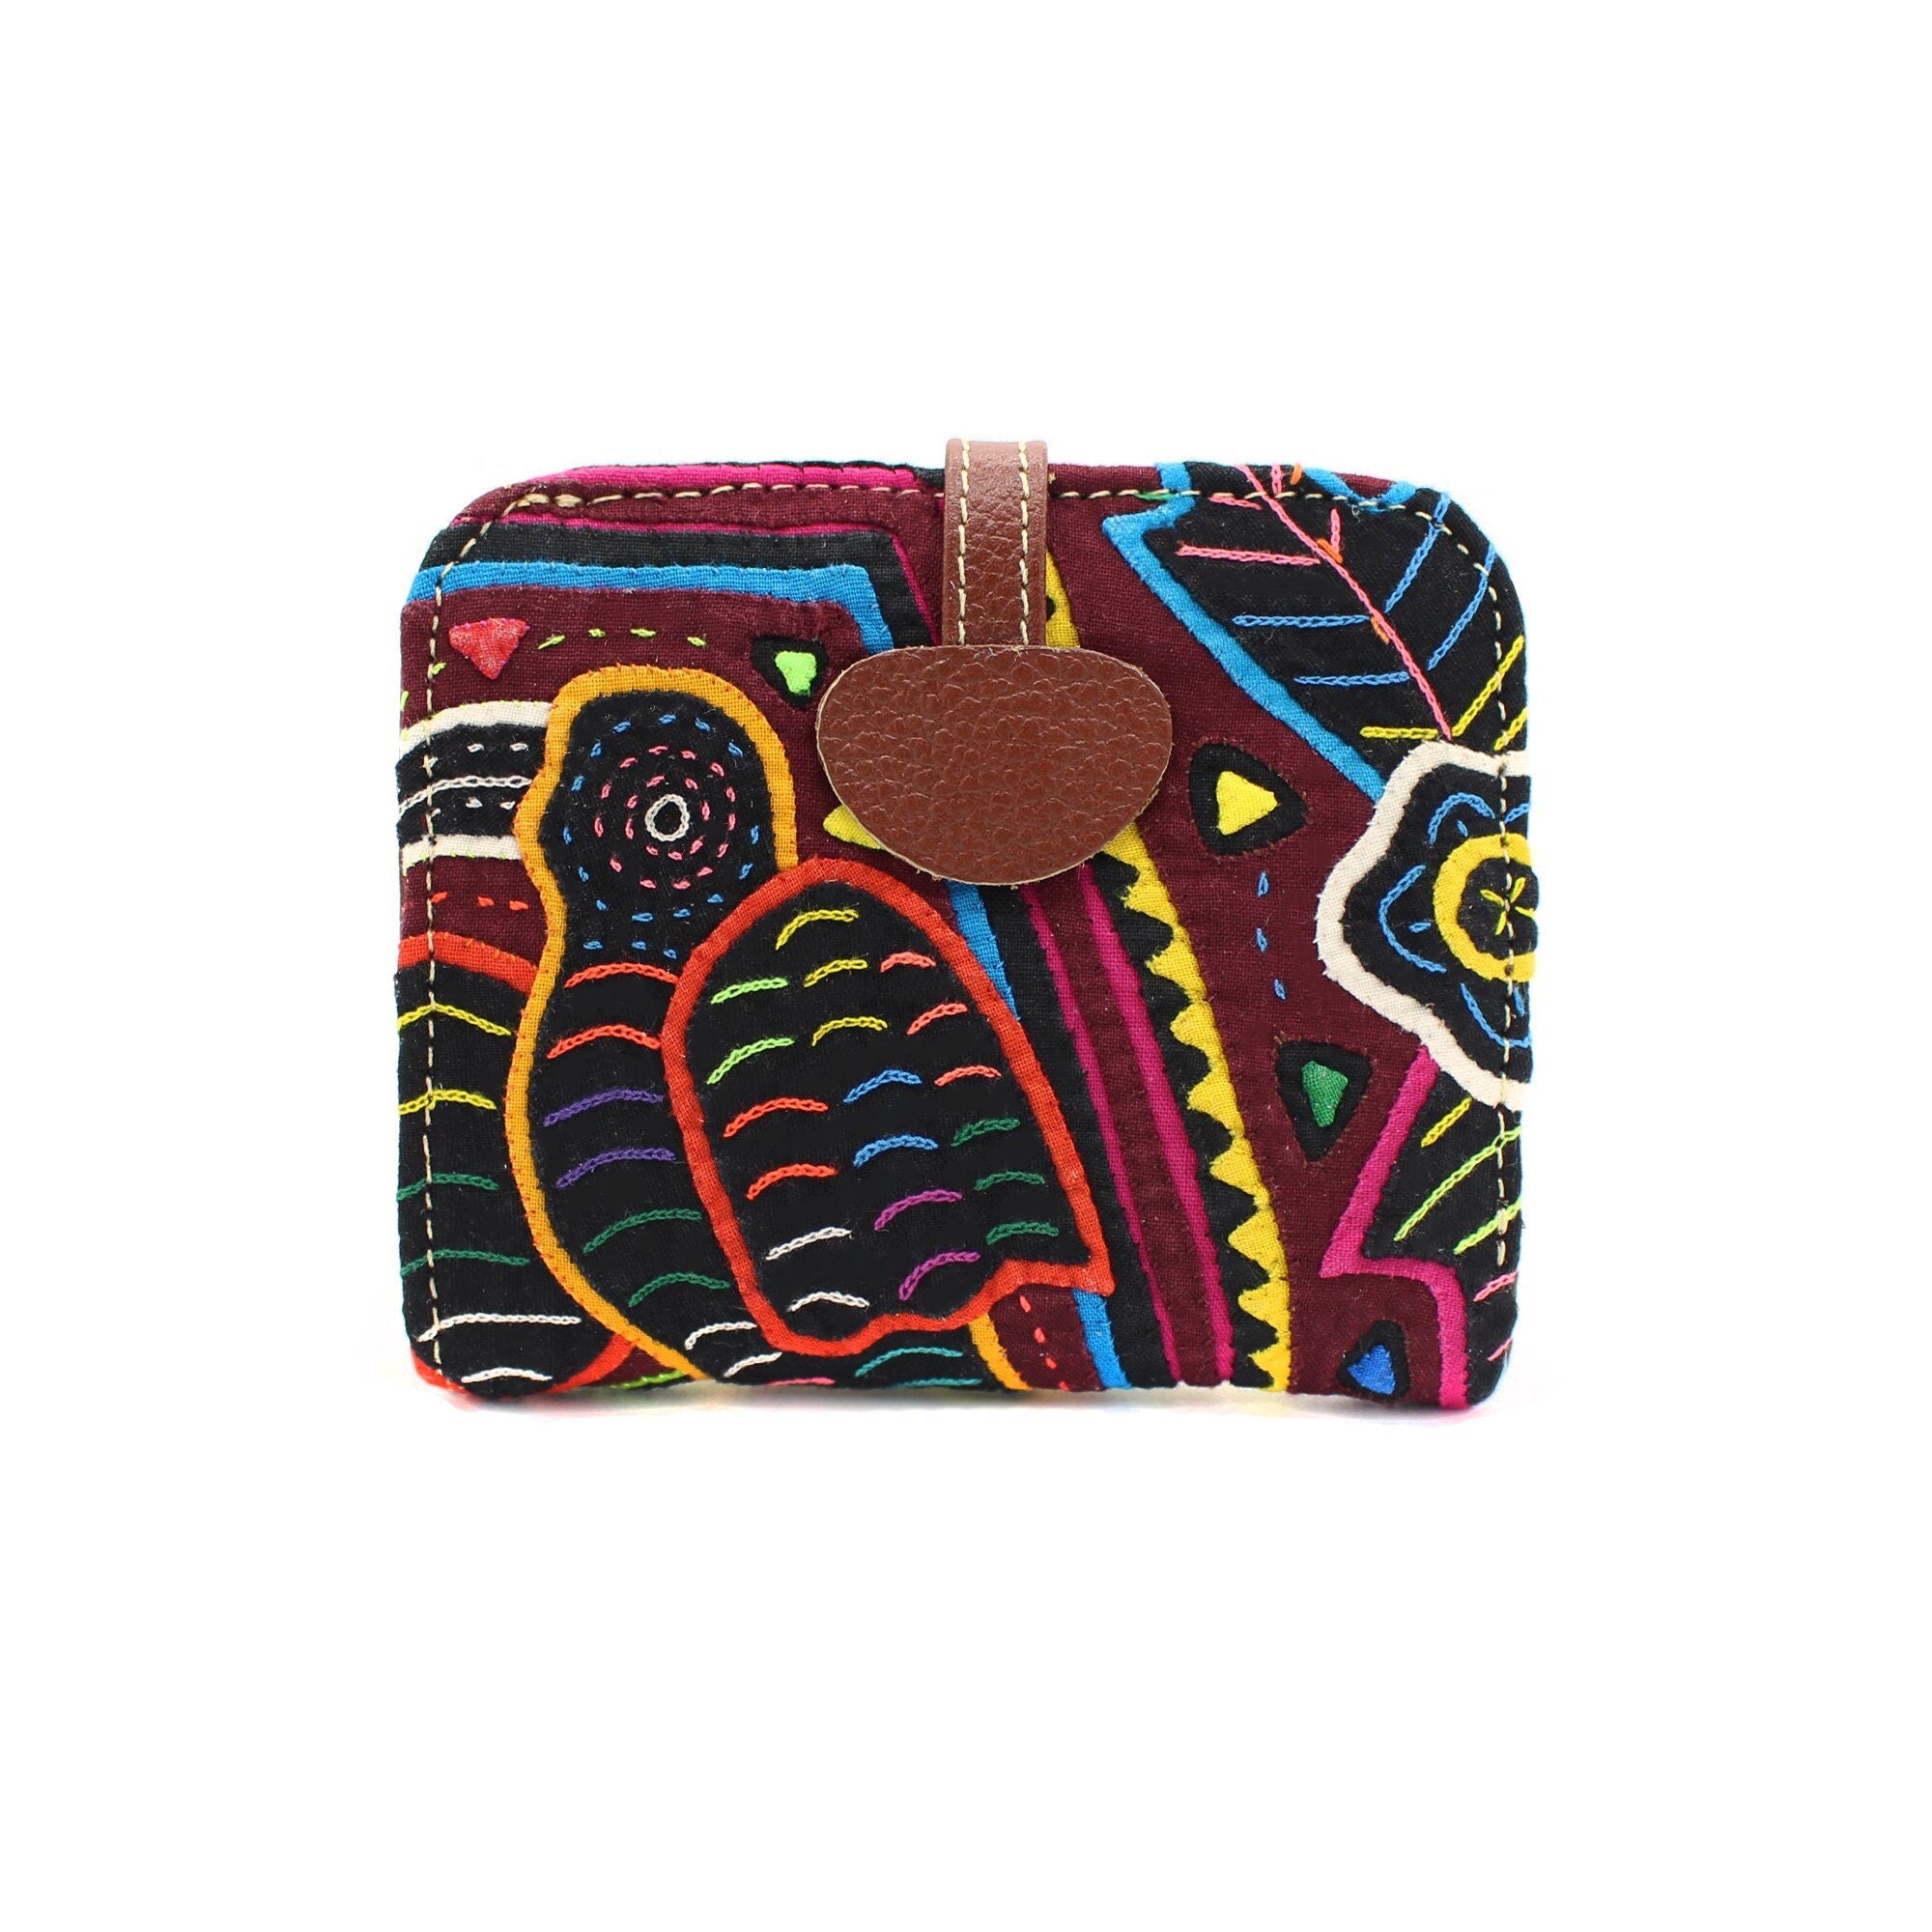 Full Mola + Leather Wallet with Picture Pocket | Handmade Kuna Tribe